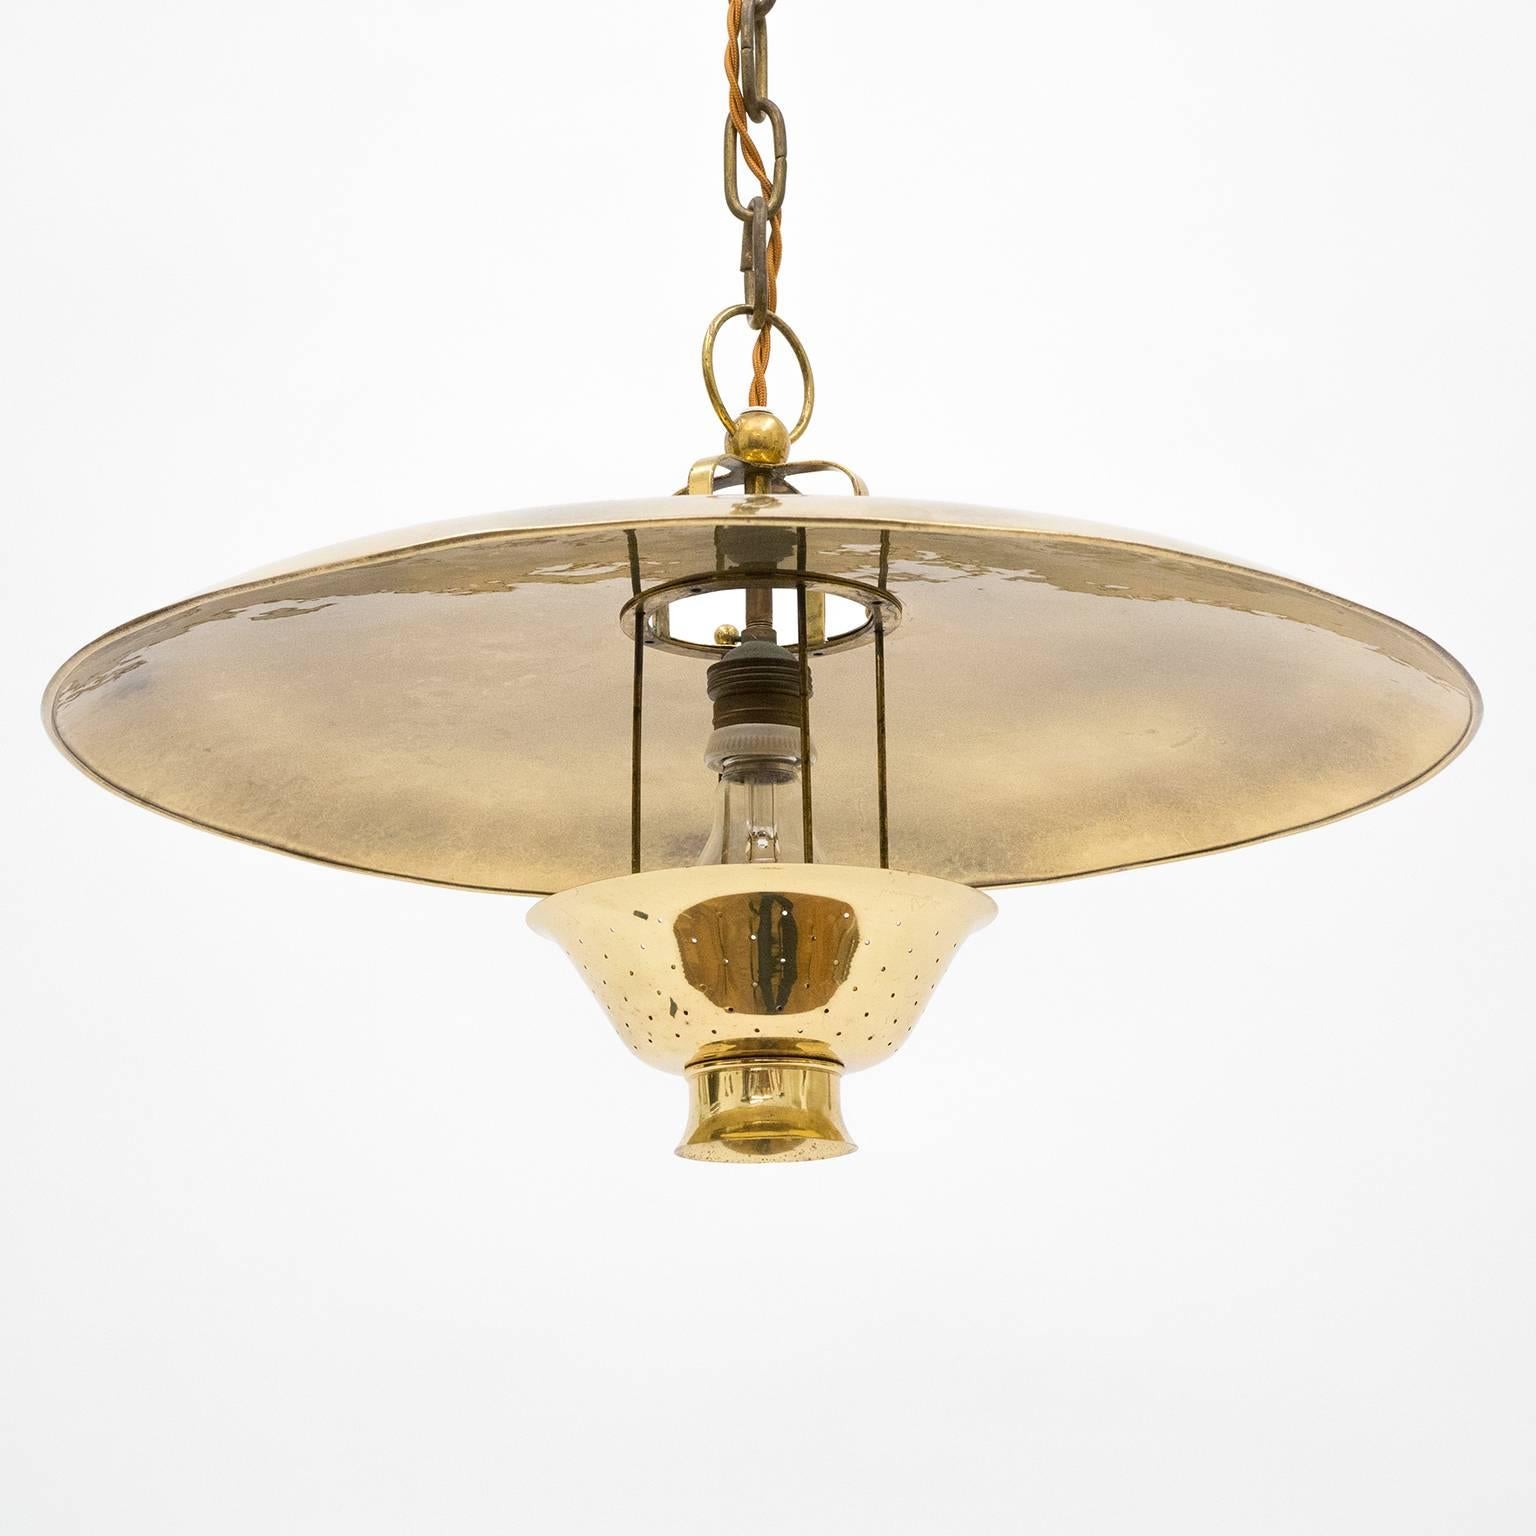 Breathtaking and beautiful all brass pendant by BAG Turgi, Switzerland, 1940s. Style-wise this is at the crossroad of Art Deco and Modernist, made entirely of brass with an incredibly rich and smooth patina. The small pierced brass diffuser can be